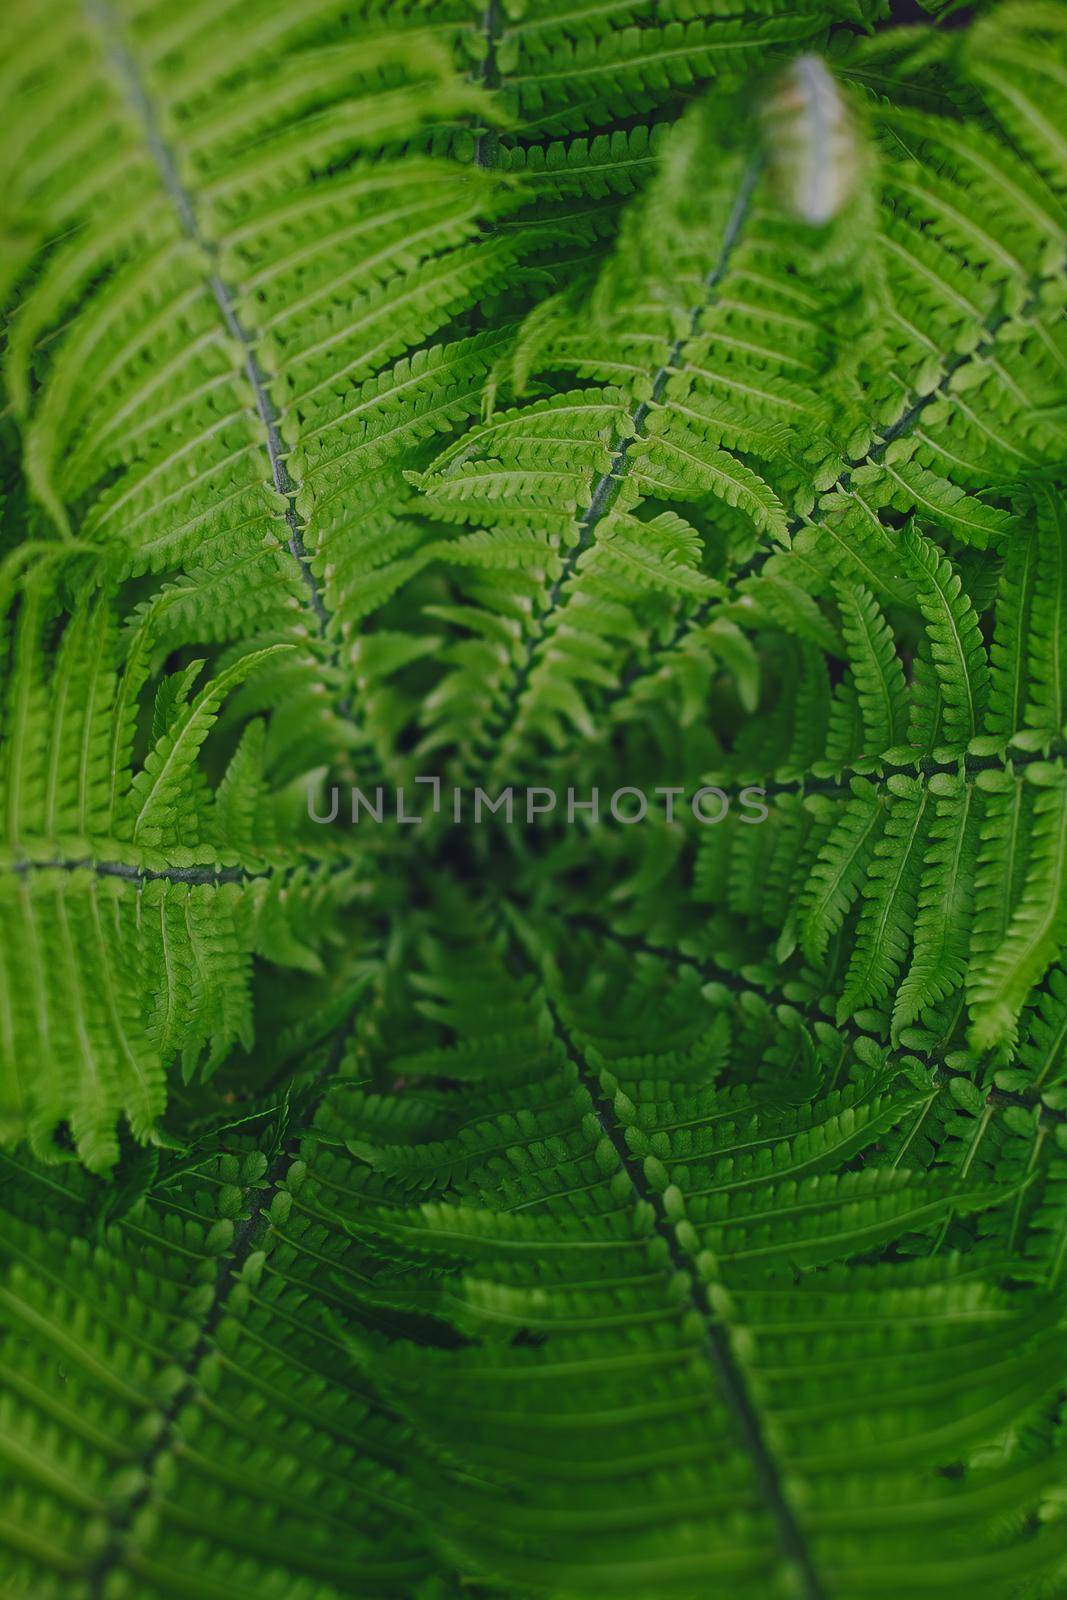 Perfect natural fern pattern. Beautiful background made with young green fern leaves.